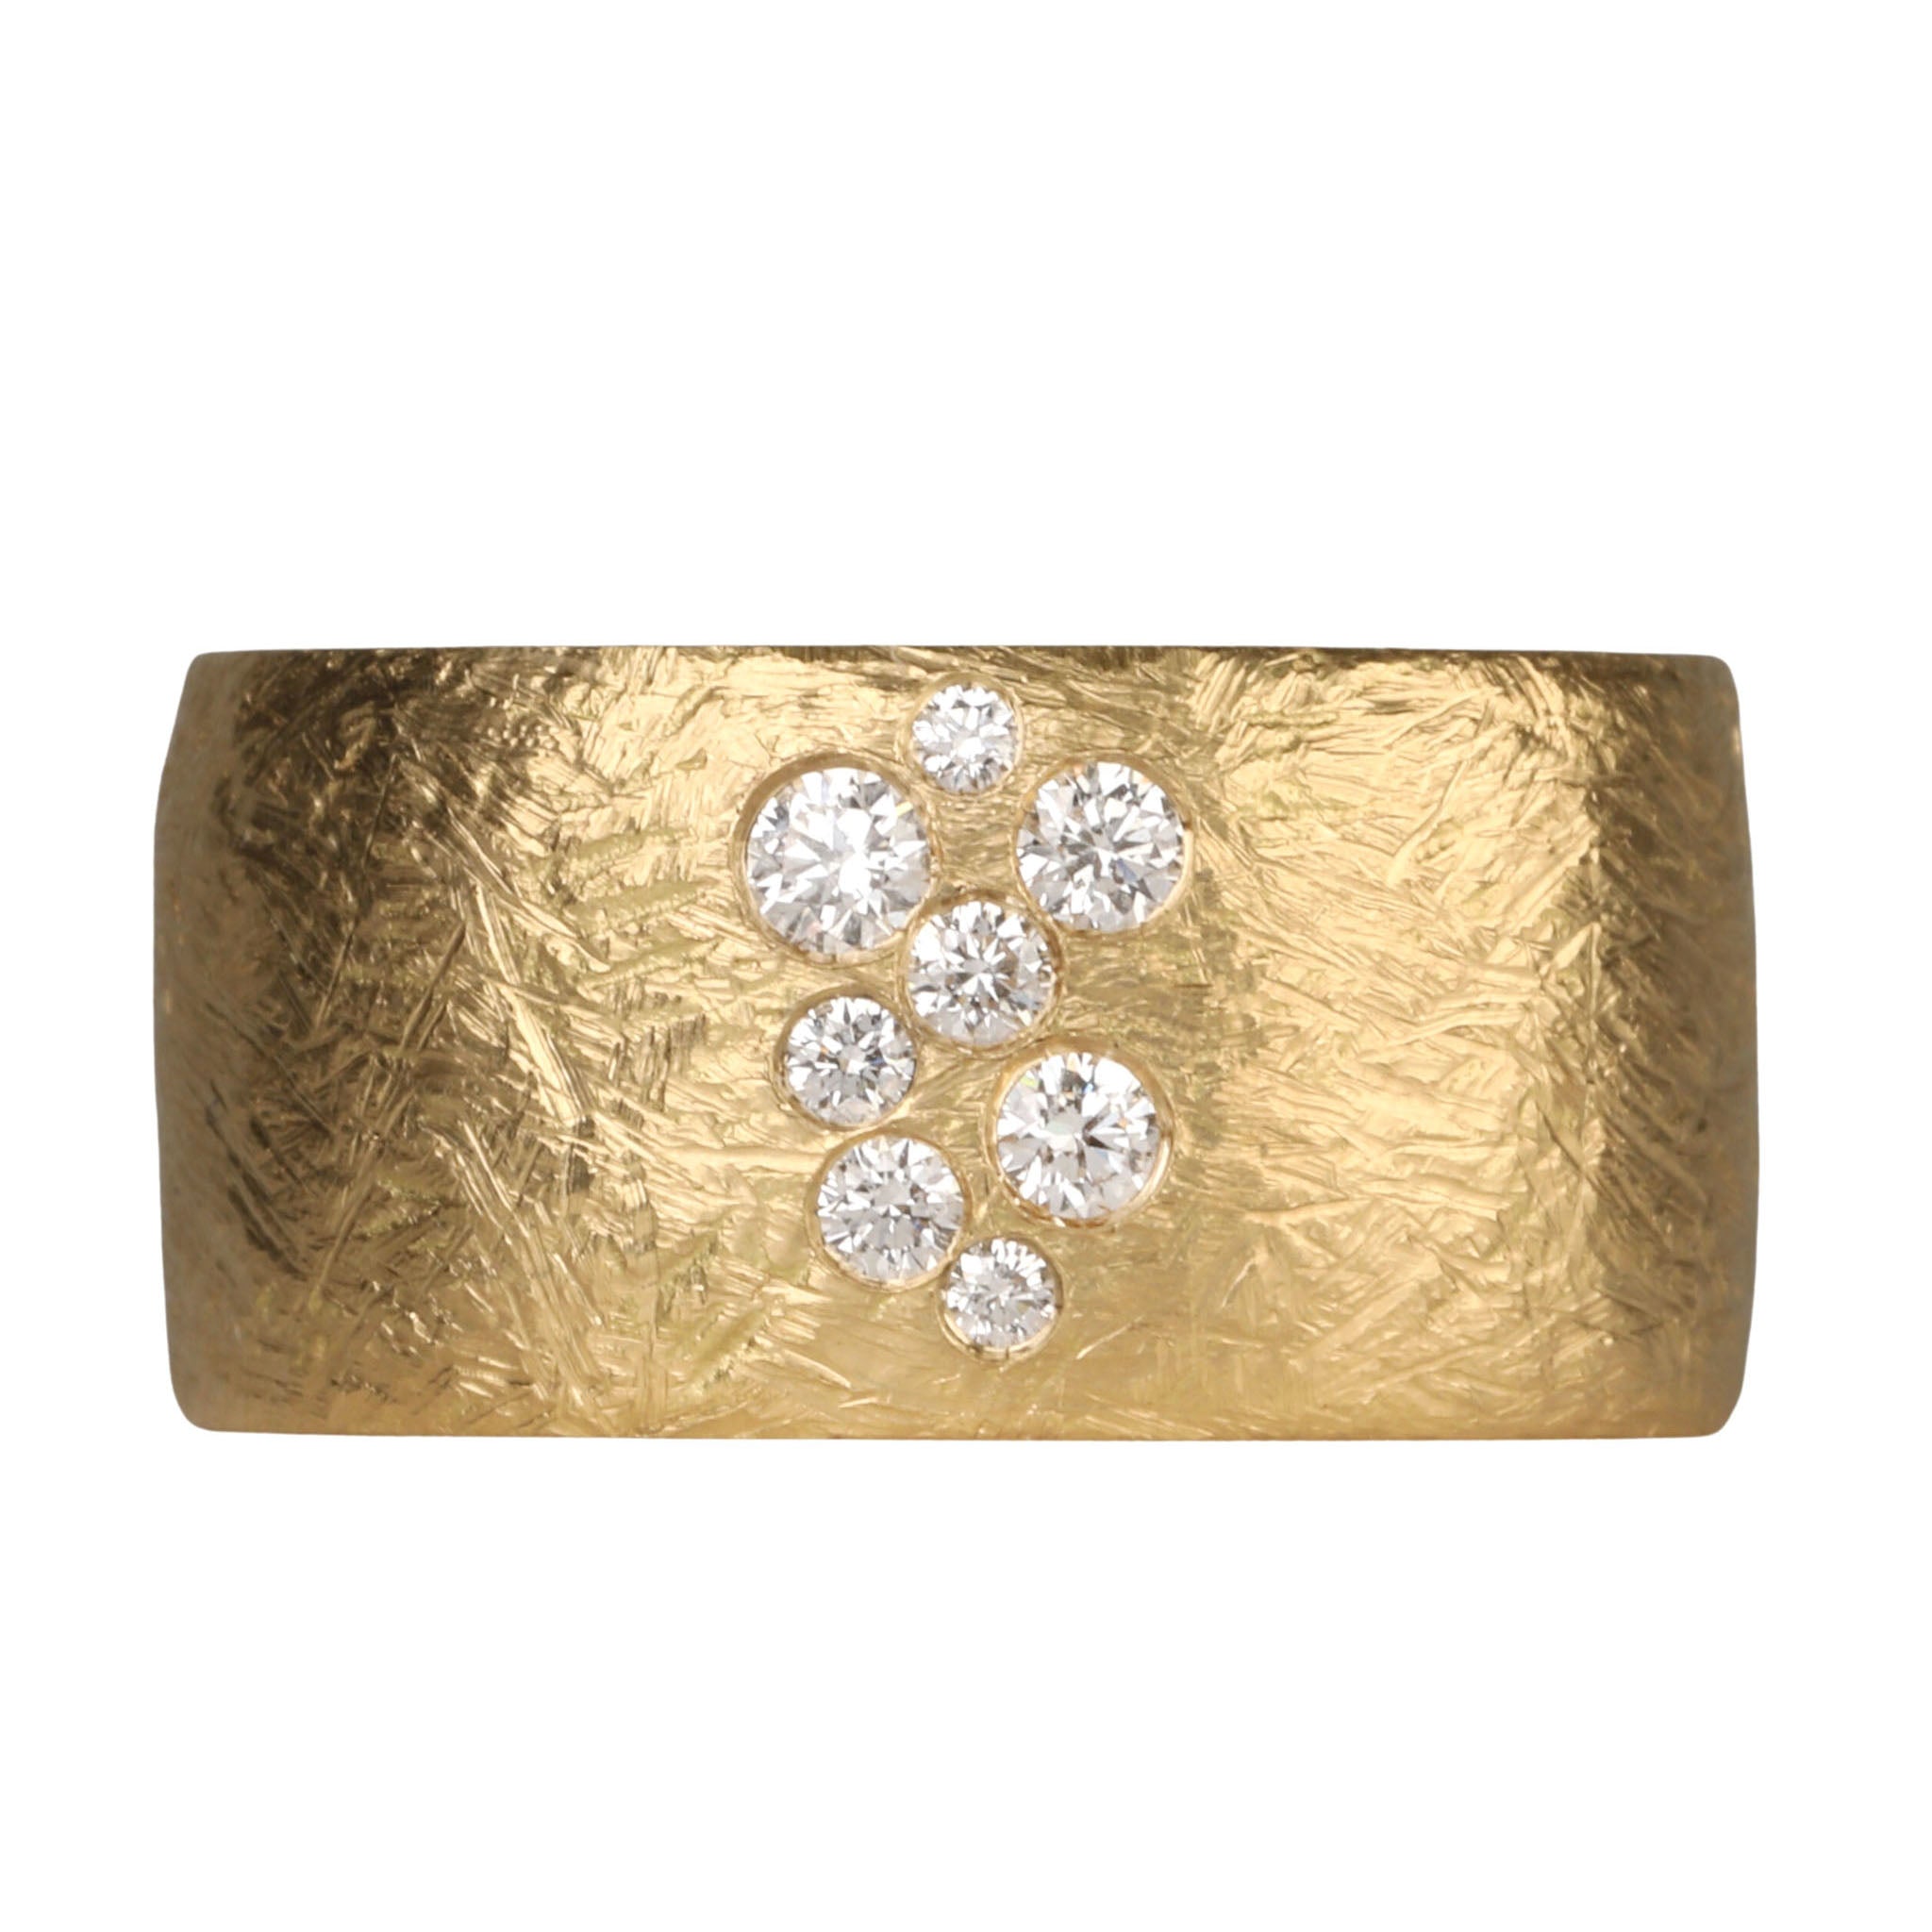 18K Gold Cigar Band with Diamond Inlay &quot;Constellation&quot; Motif - Peridot Fine Jewelry - Anne Sportun